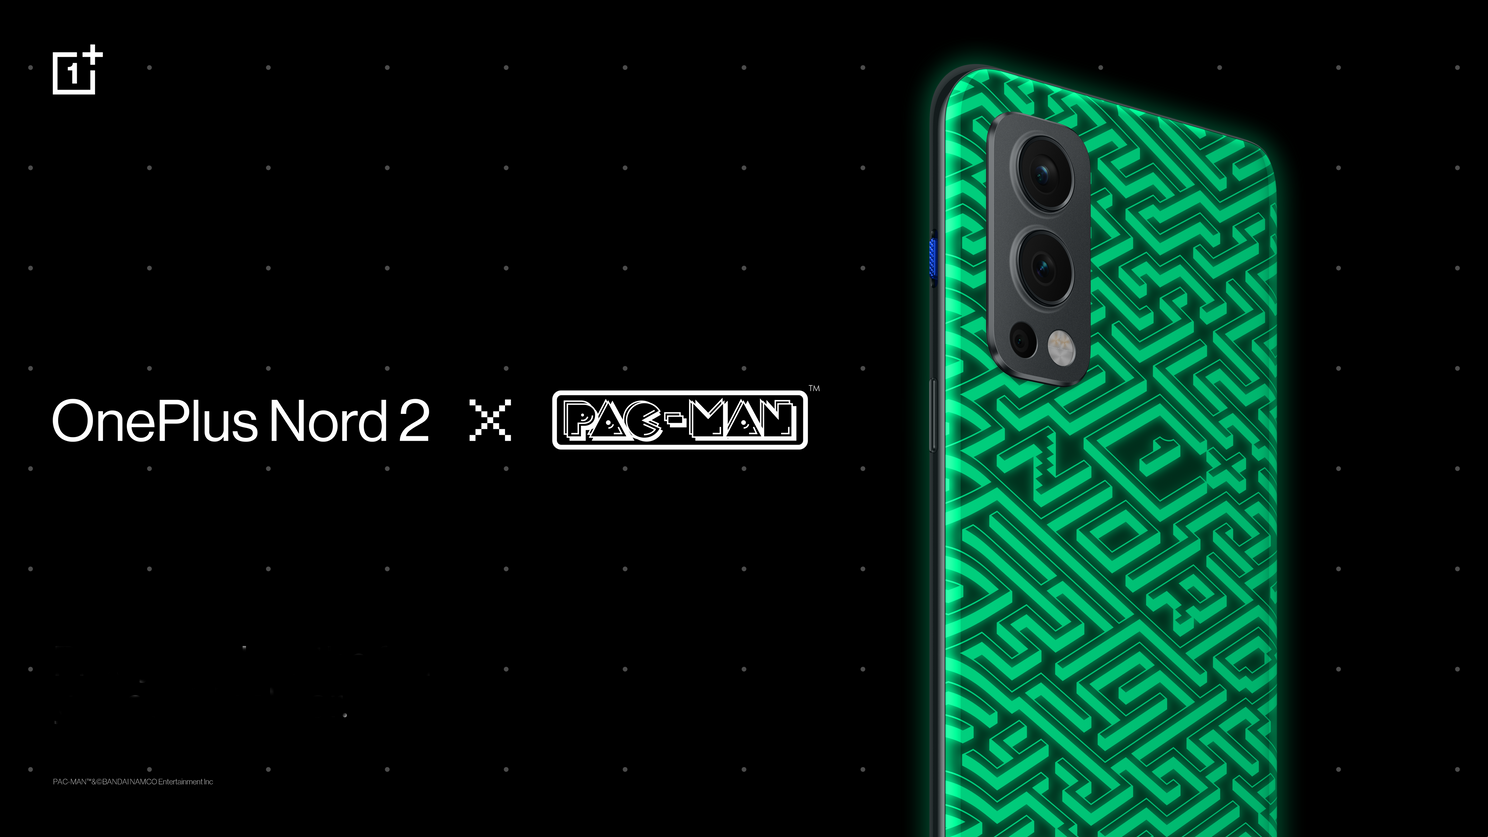 Playful OnePlus Nord 2 Pac-Man Edition brings you into a nostalgic atmosphere